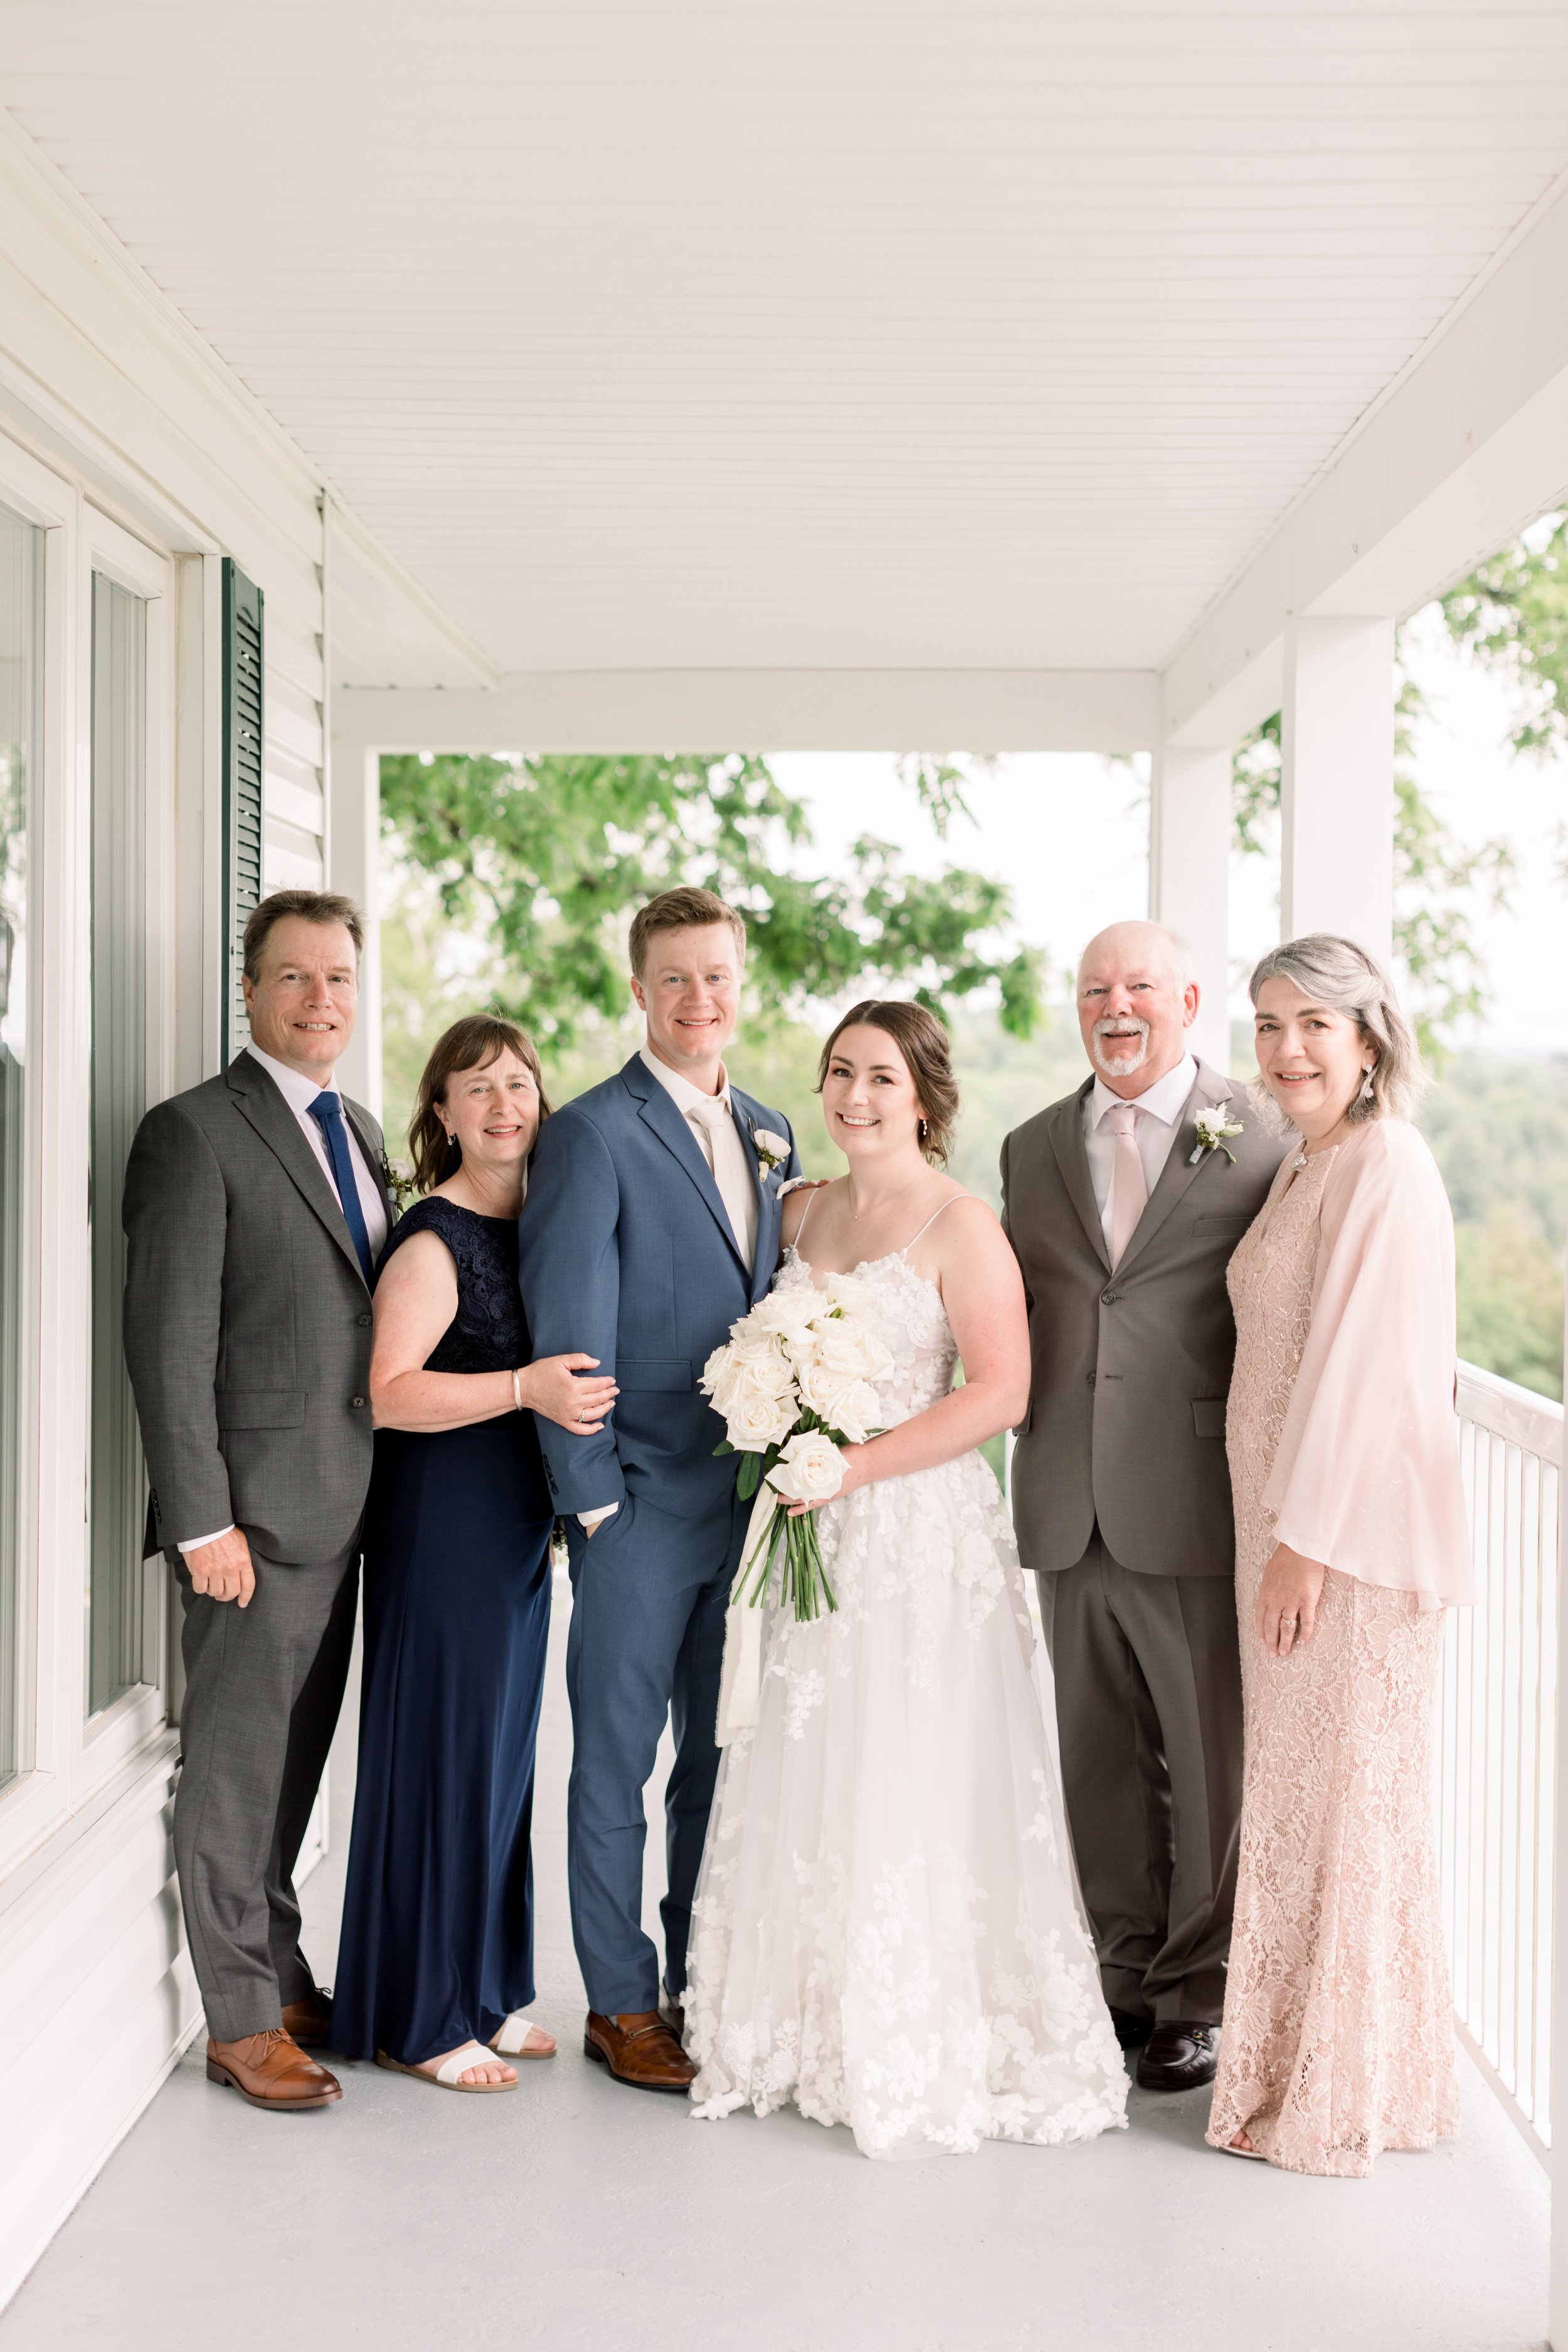  Chelsea Mason Photography captures a portrait of the bride and groom with their parents during a wedding in Ontario. wedding portraits parent #chelseamasonphotography #chelseamasonweddings #Ontarioweddings #Boulterweddingphotographer #laceweddinggow